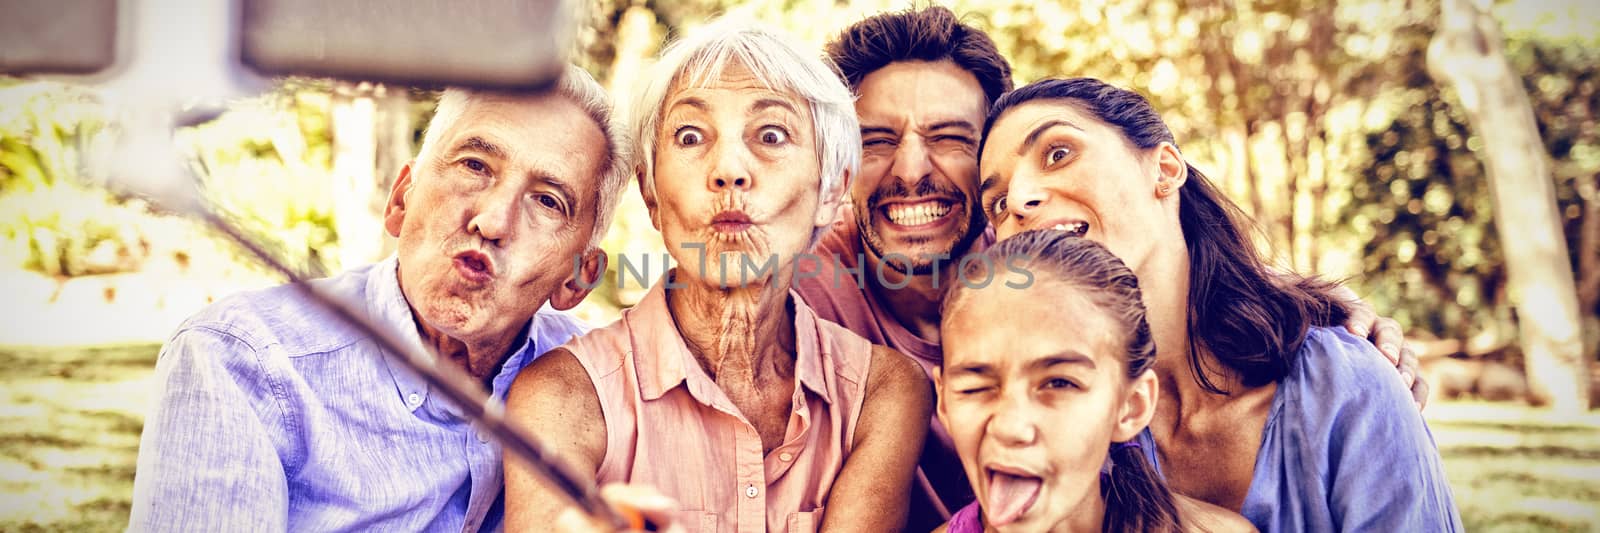 Family making funny faces while taking a selfie in the park by Wavebreakmedia